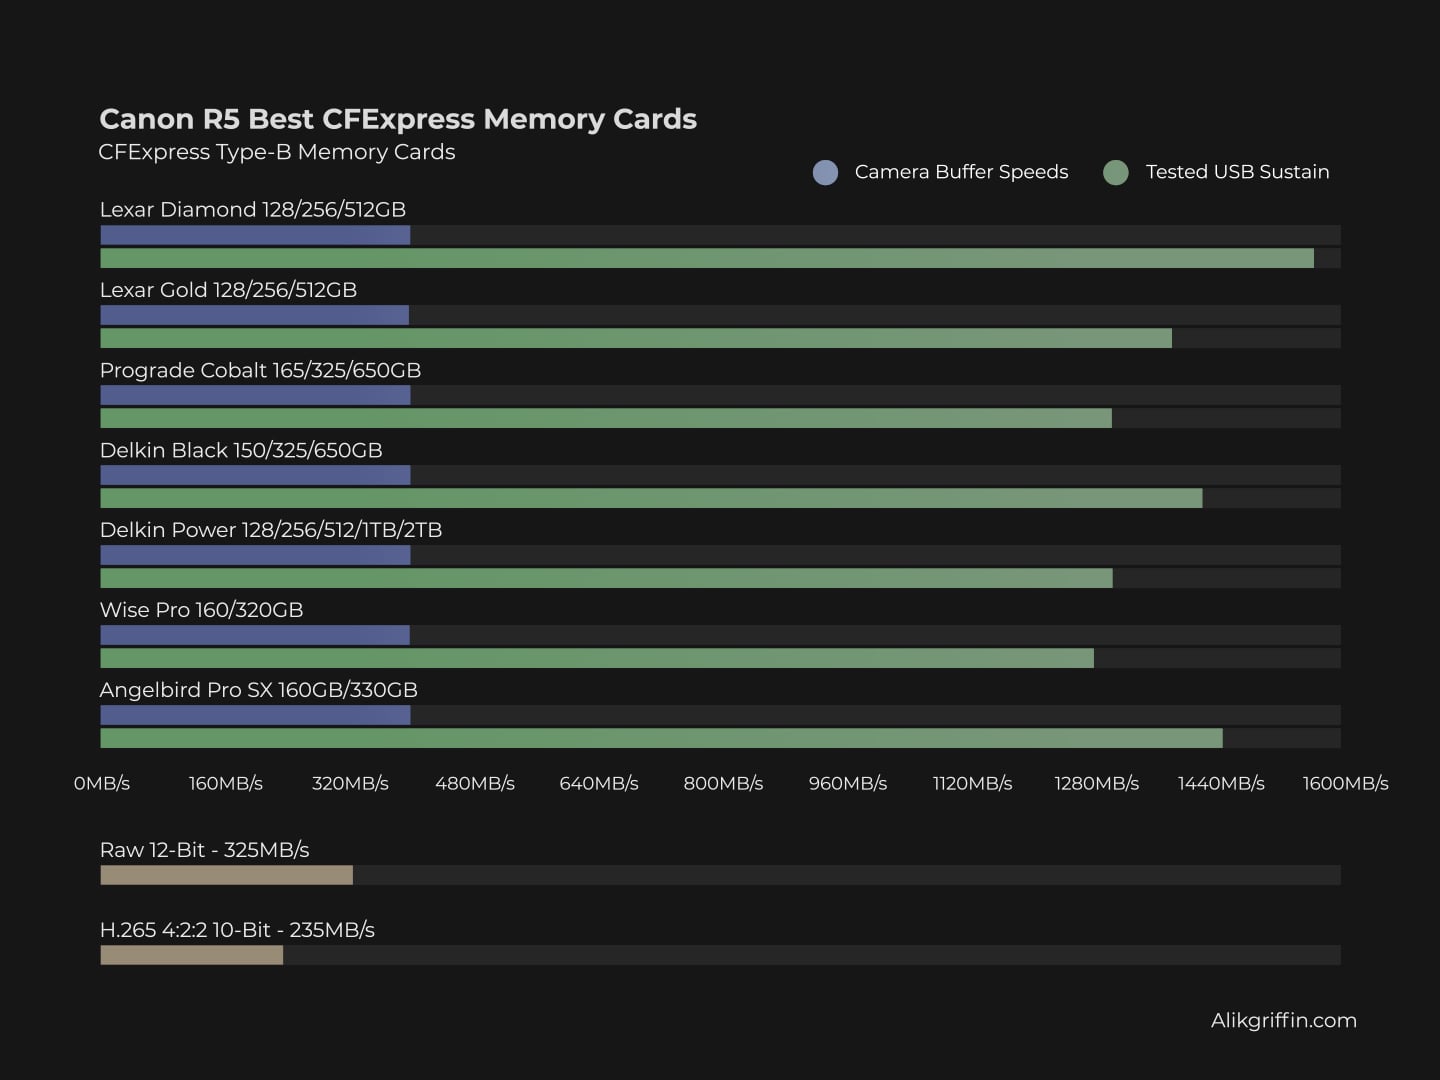 Best CFexpress Type-B Memory Cards Chart For The Canon R5